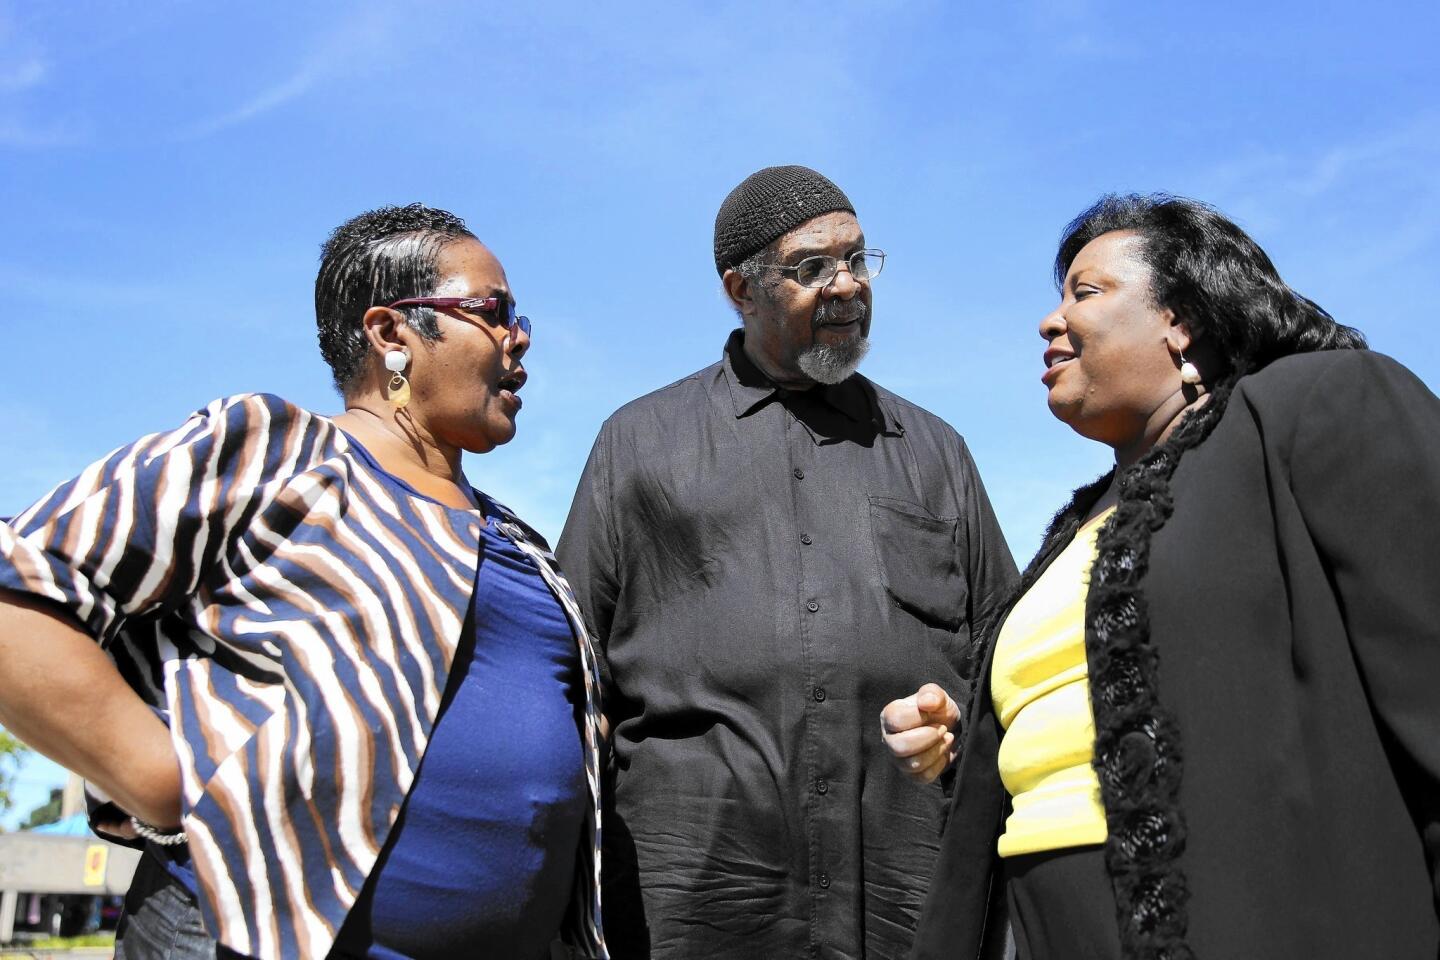 State Rep. Esther Golar, left, shown Sept. 14, 2013, with John Bradley and Mildred M.G. Olivier in Chicago. Golar was known for fighting for the disadvantaged and for singing on the House floor. She died Sept. 21 at 71. Read the obituary.